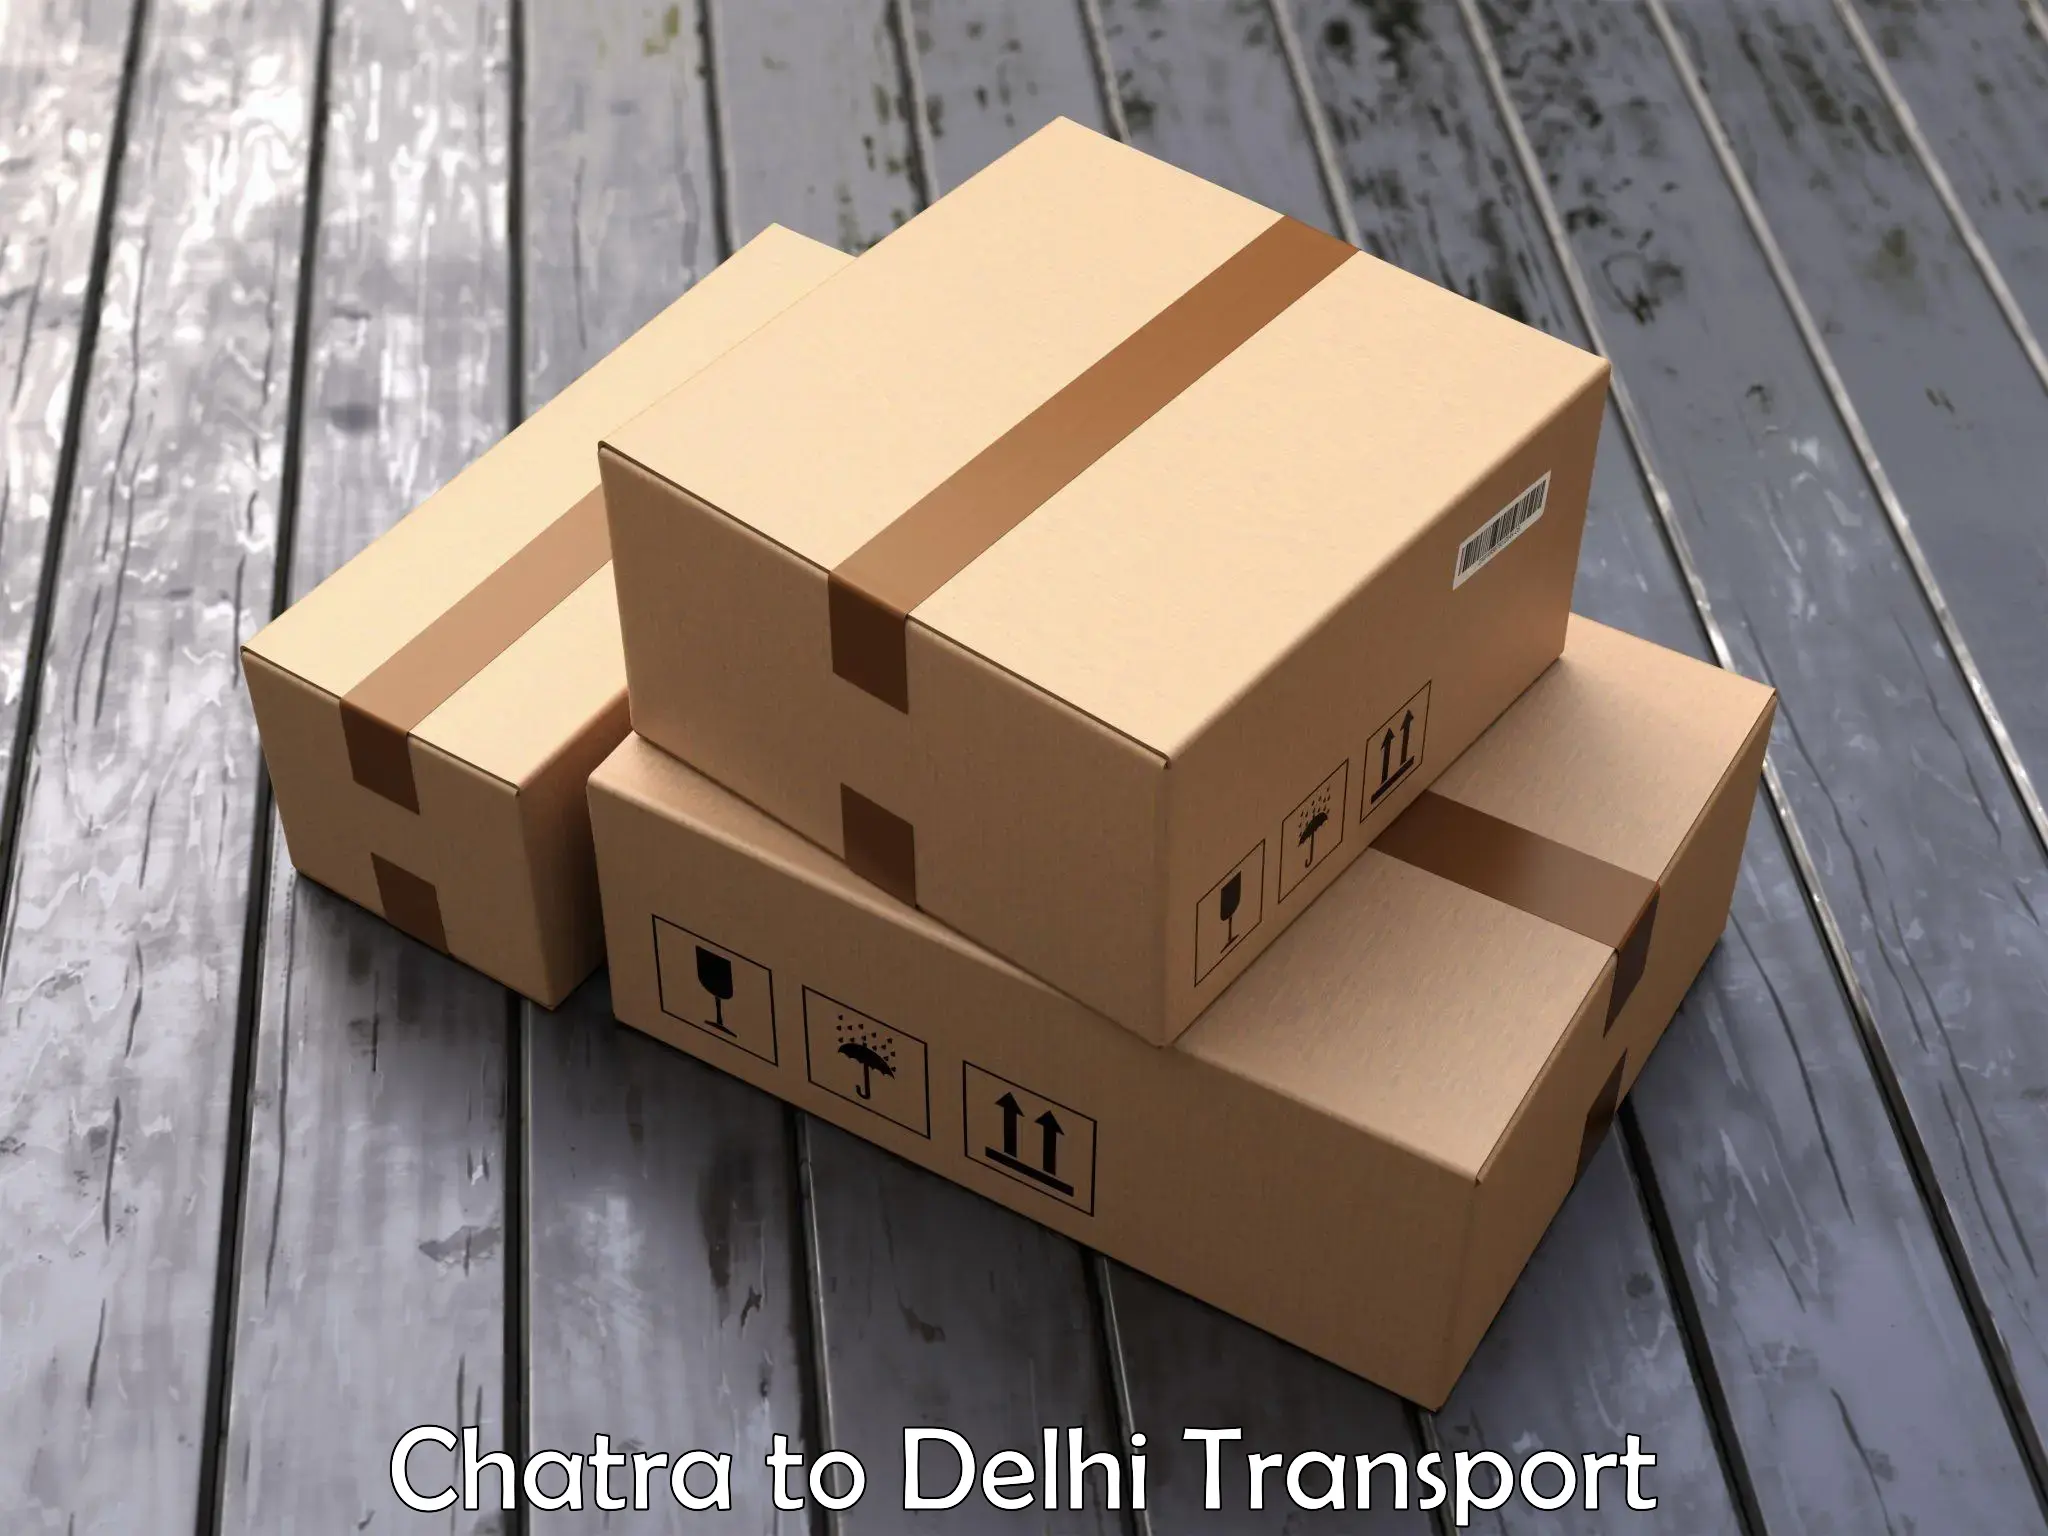 Truck transport companies in India Chatra to Lodhi Road